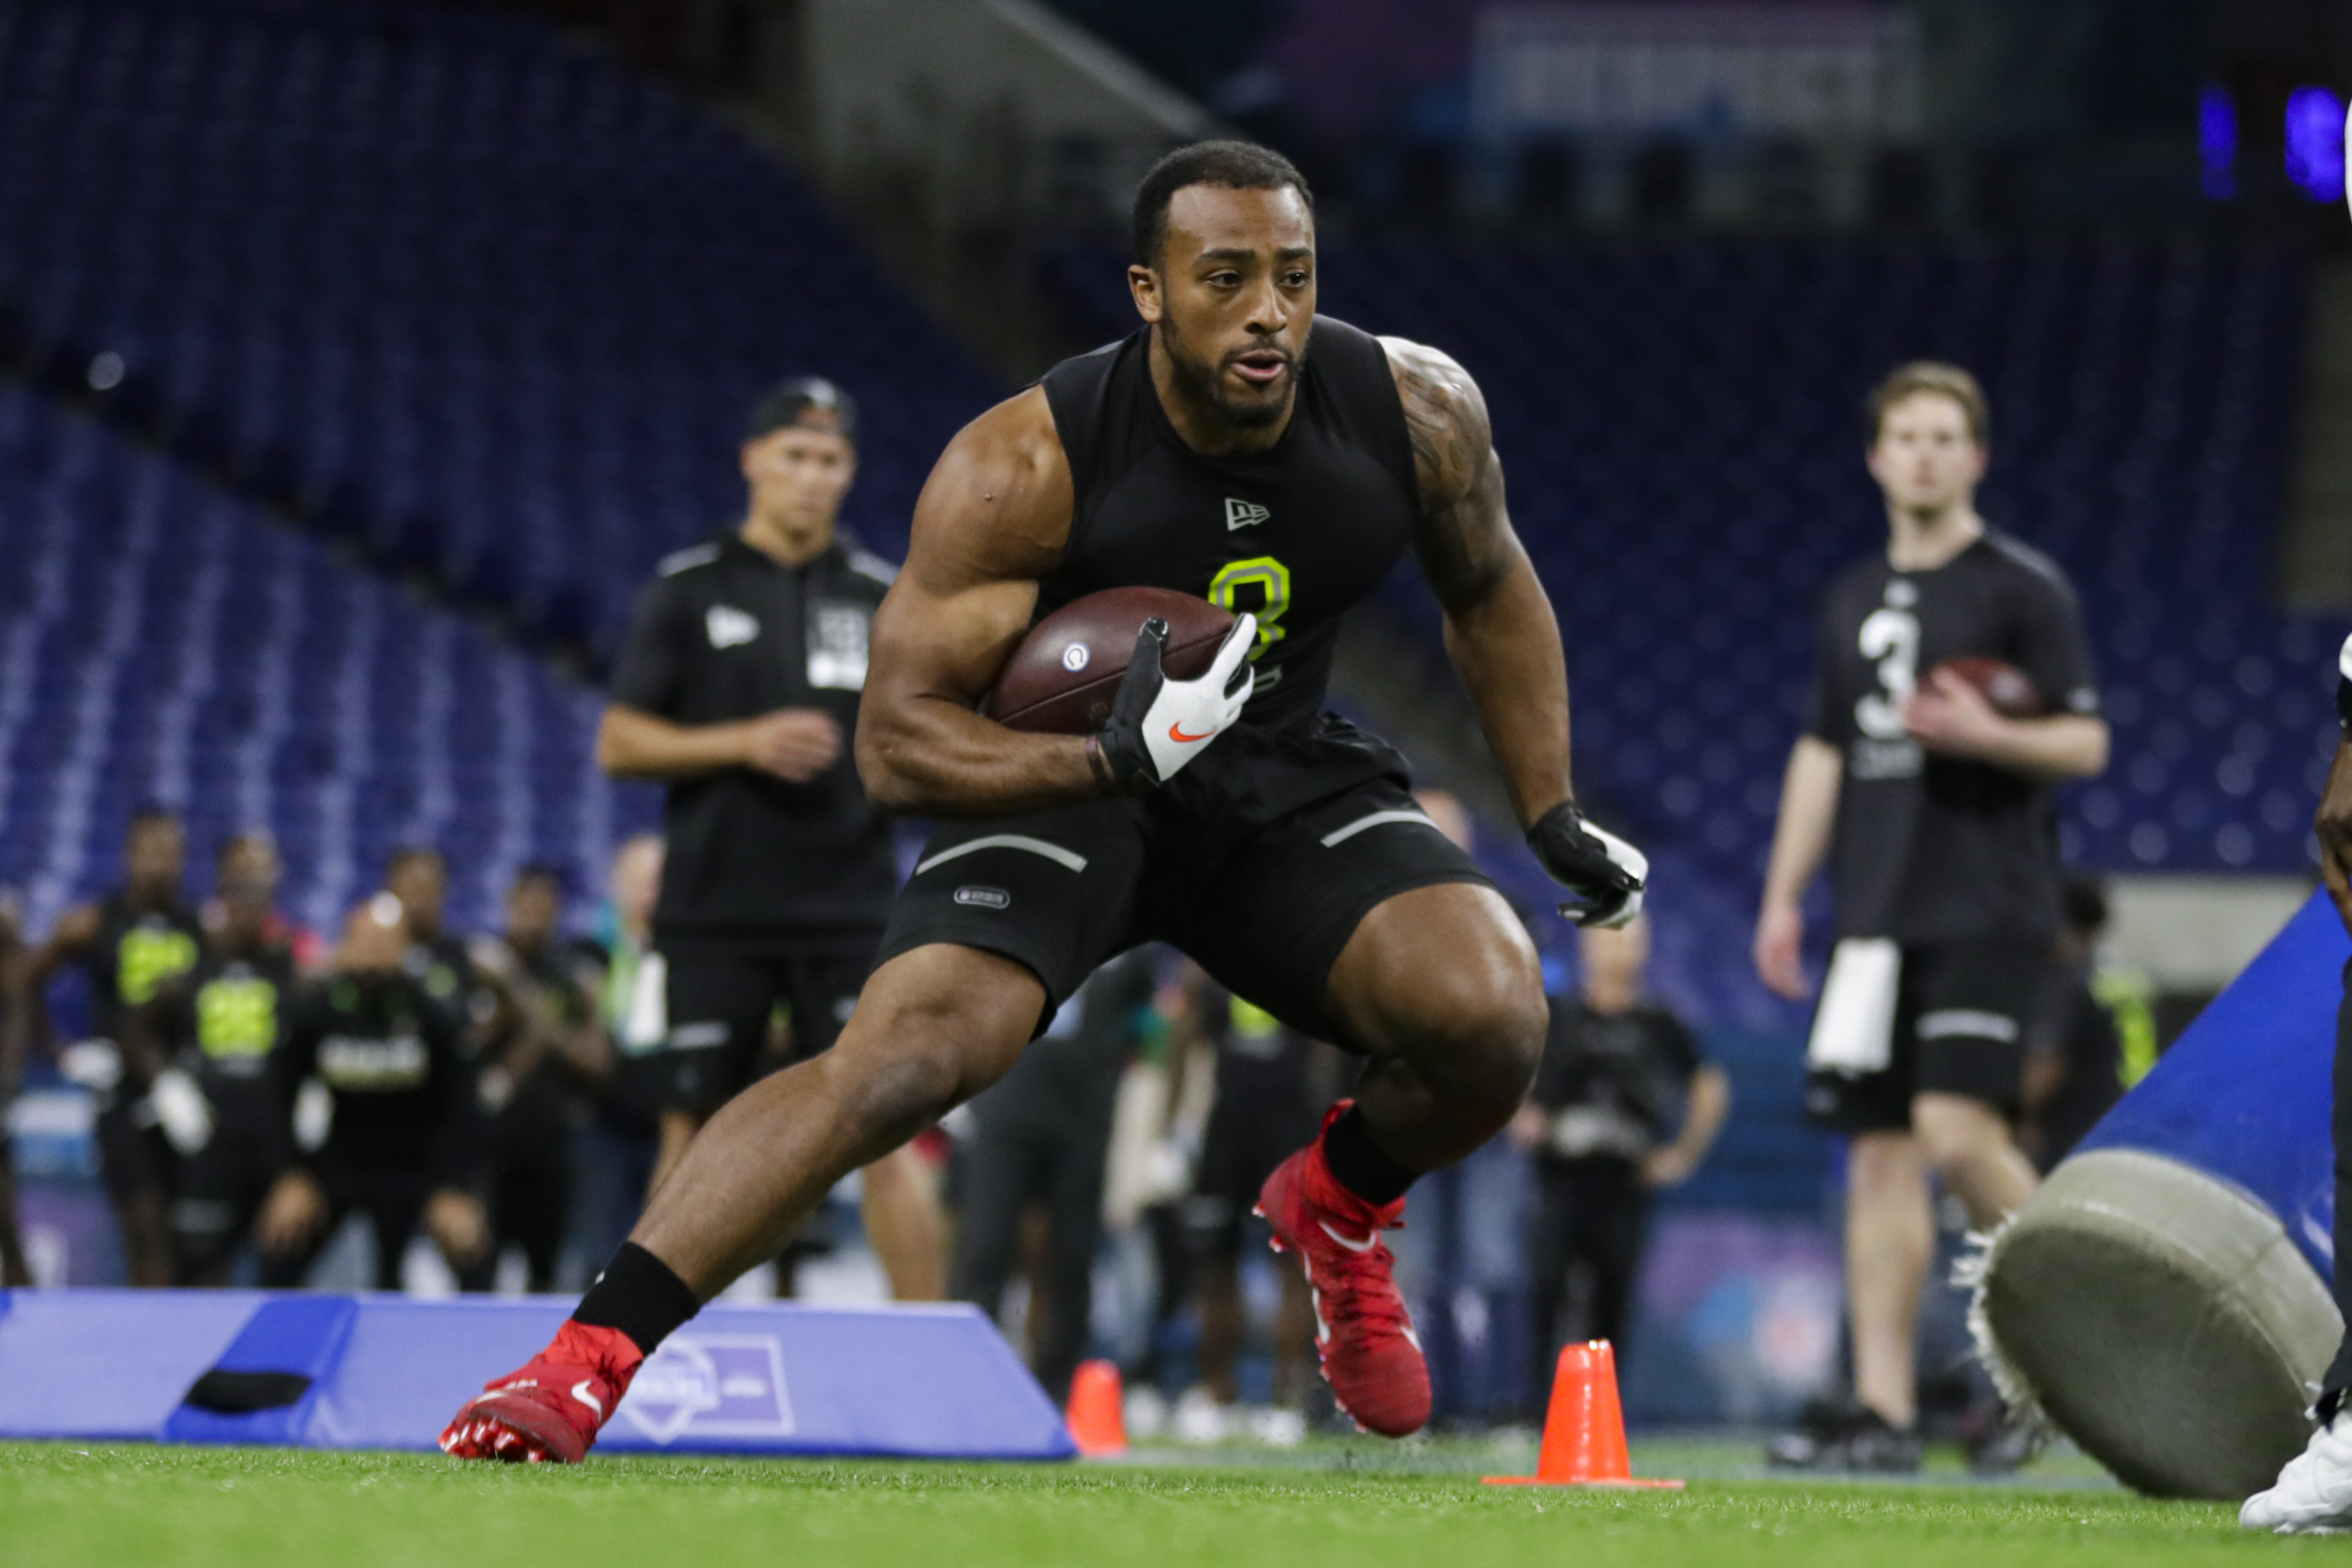 Green Bay Packers Select AJ Dillon in the 2020 NFL Draft - Boston